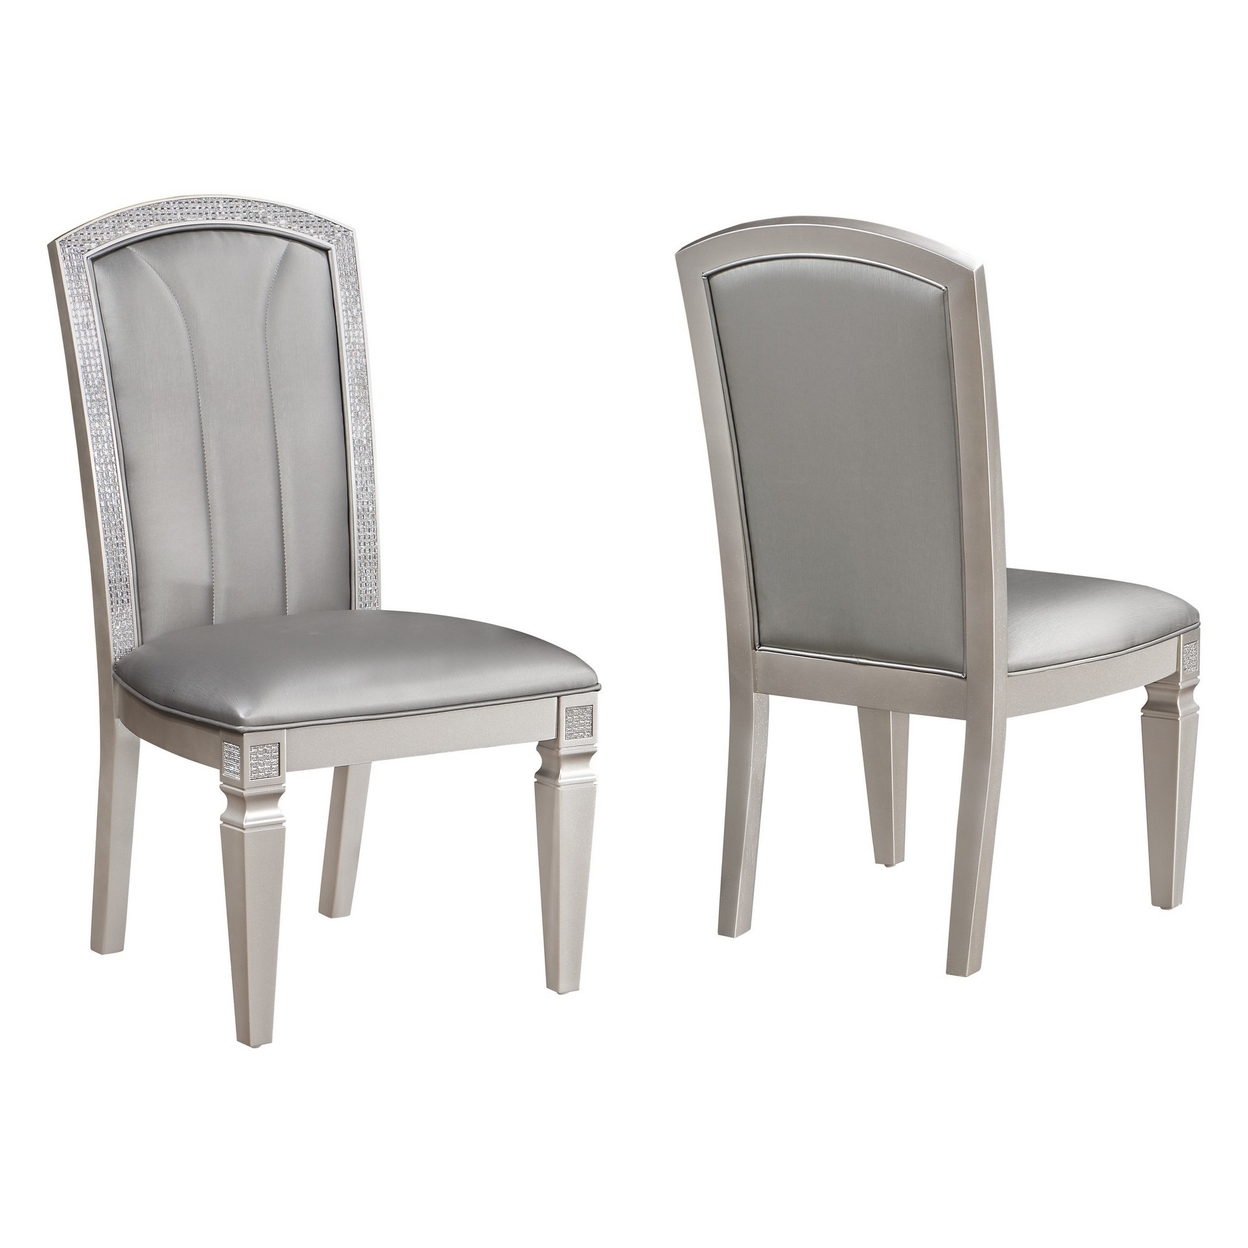 Scott 19 Inch Dining Side Chair Set Of 2, Gray Faux Leather, Taupe Wood -Saltoro Sherpi